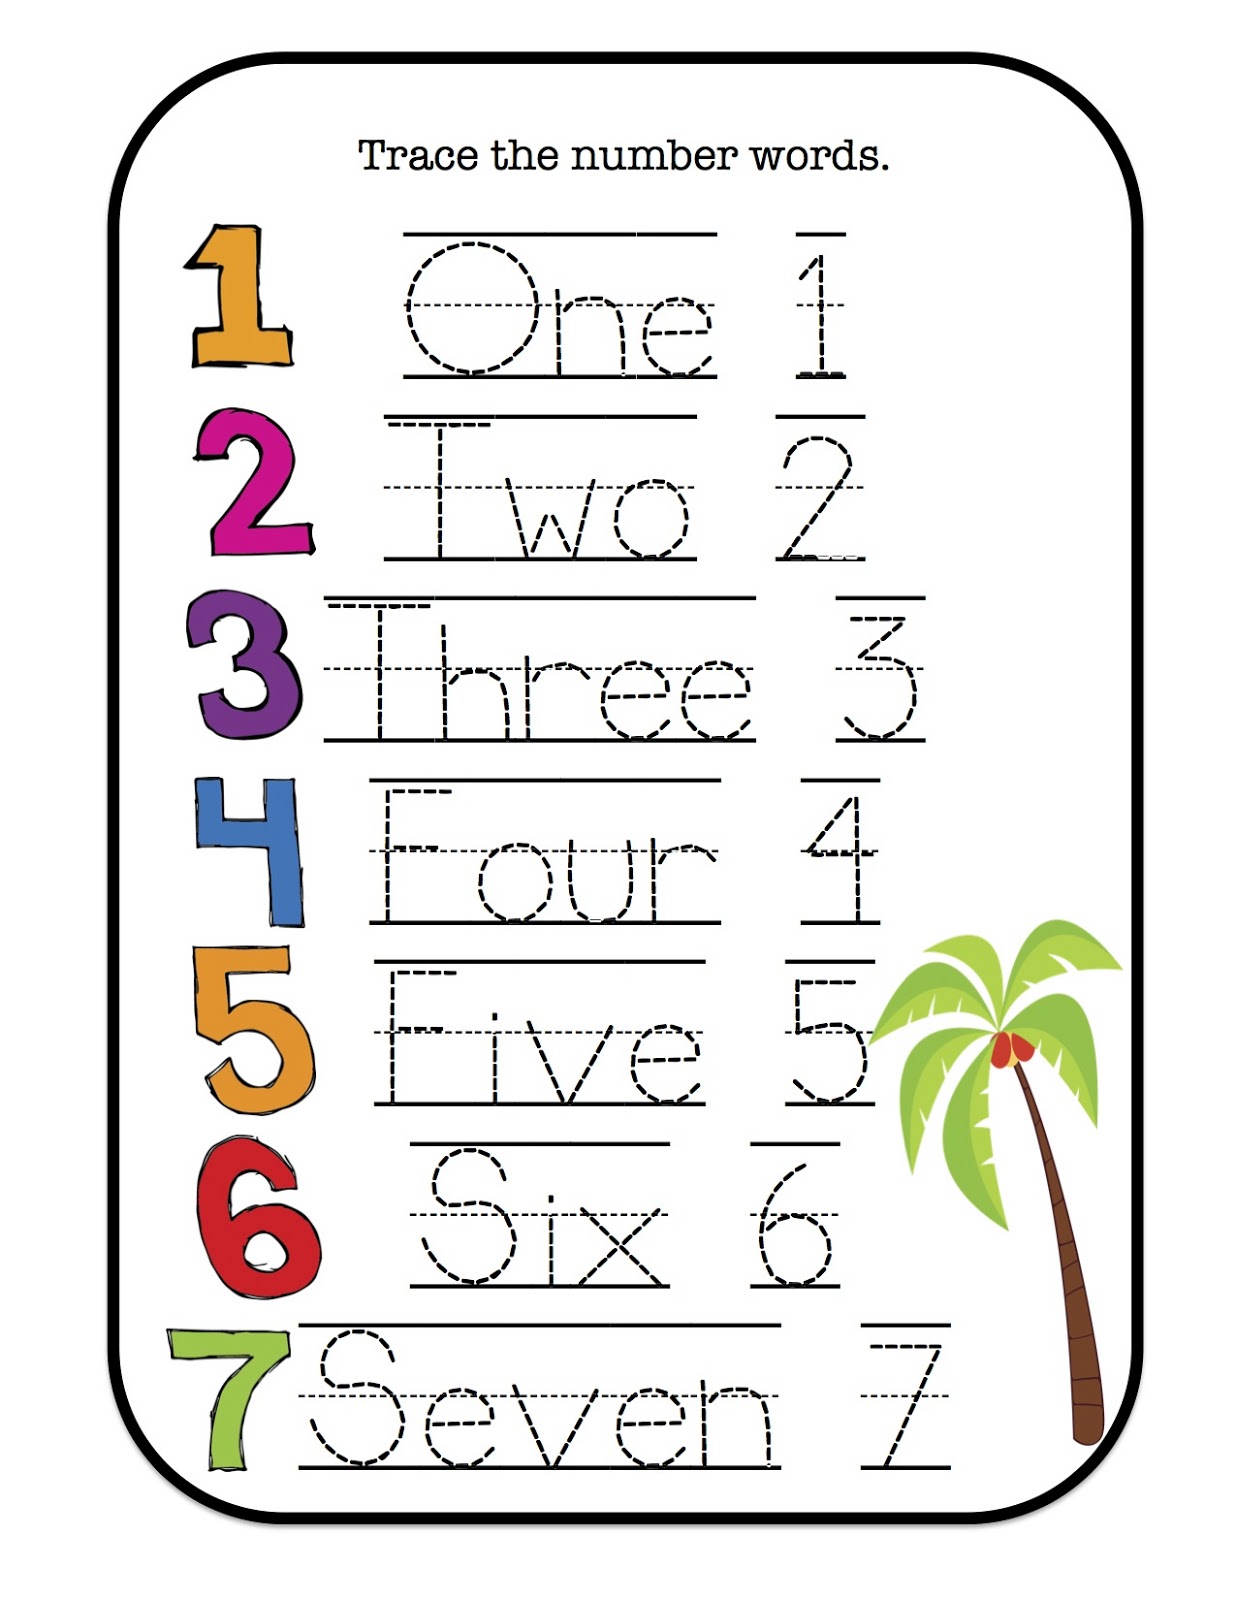 traceable-numbers-1-10-worksheets-to-print-activity-shelter-tracing-numbers-1-10-for-preschool